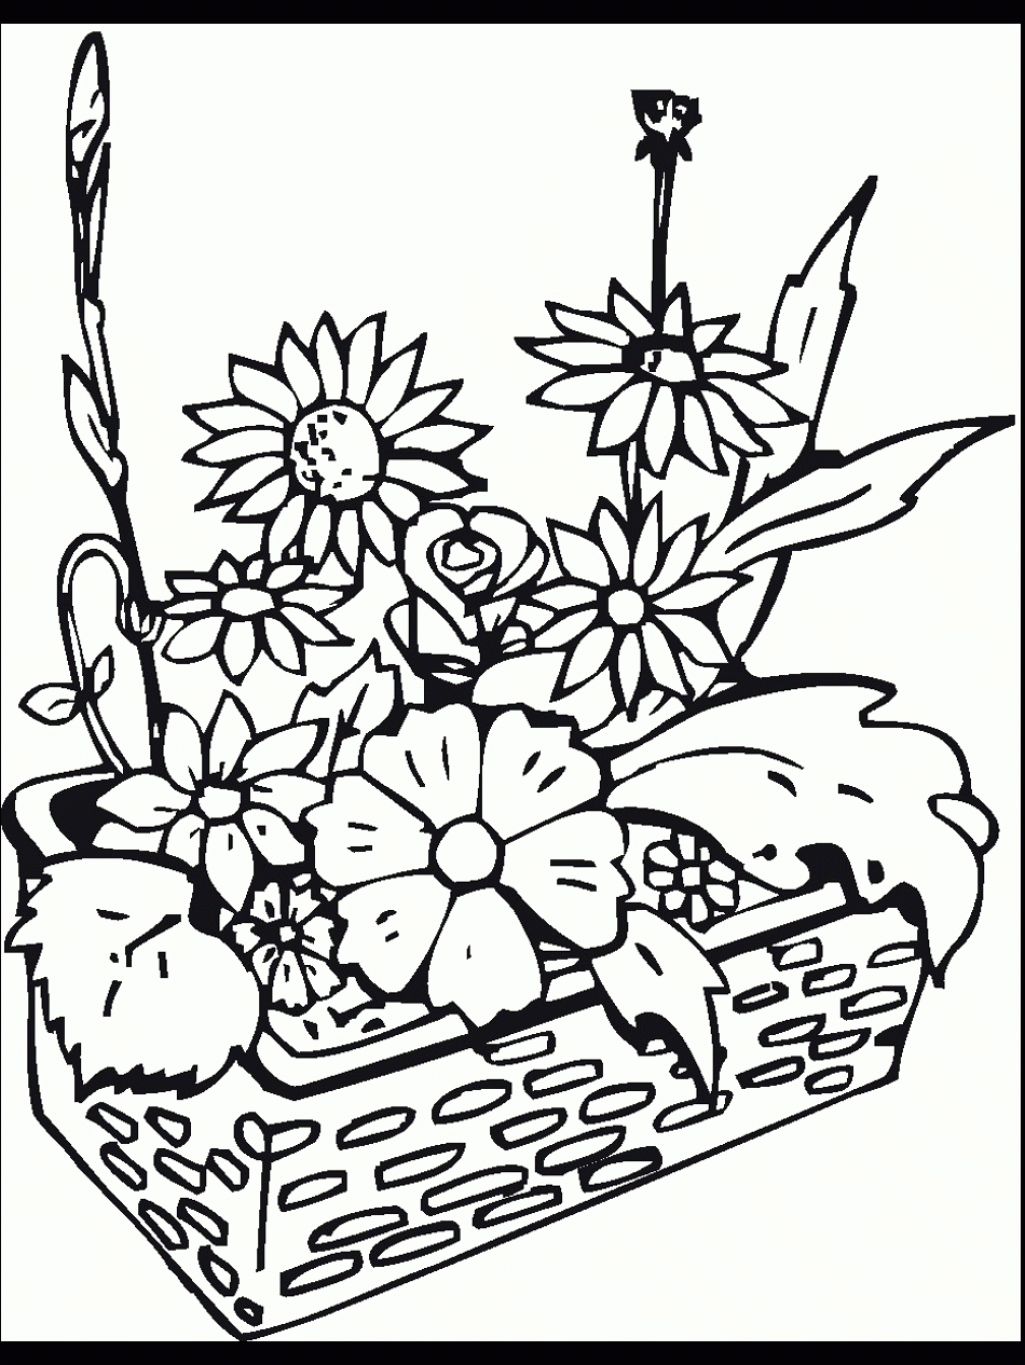 Flower Garden Coloring Pages 491257 Coloring Pages For Free 2015 ...